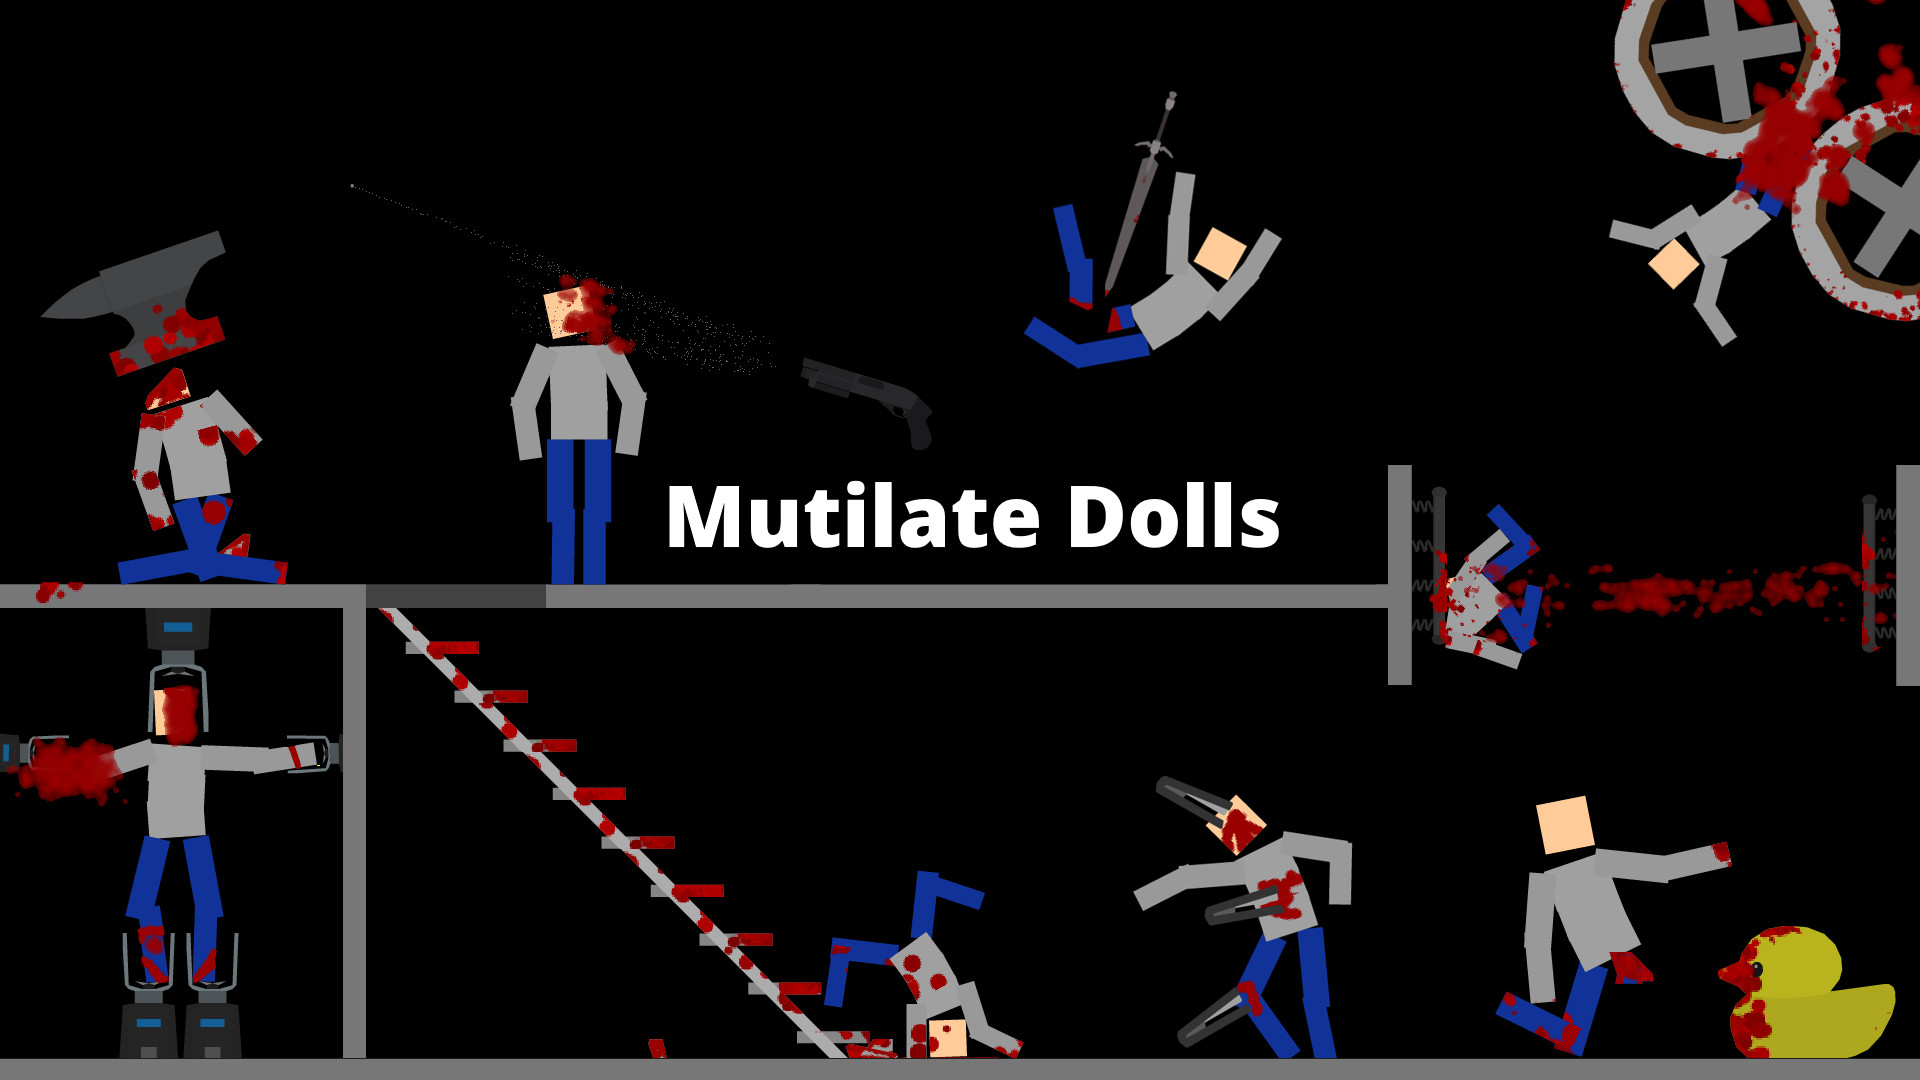 MUTILATE A DOLL VS PEOPLE PLAYGROUND 2